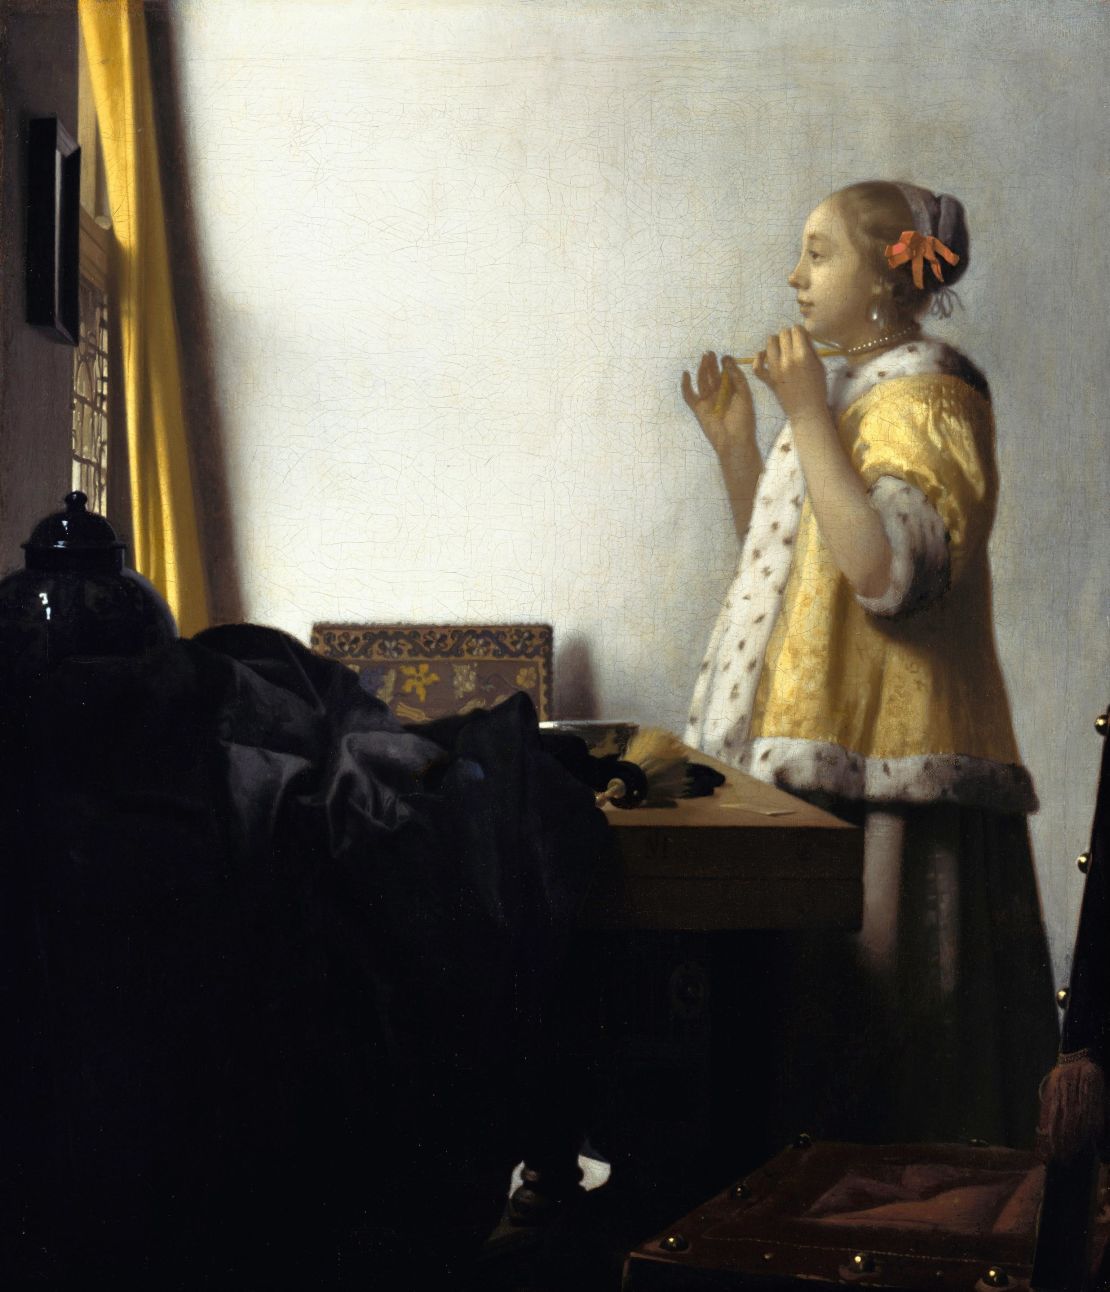 Vermeer's "Young Woman with a Pearl Necklace" (1664)